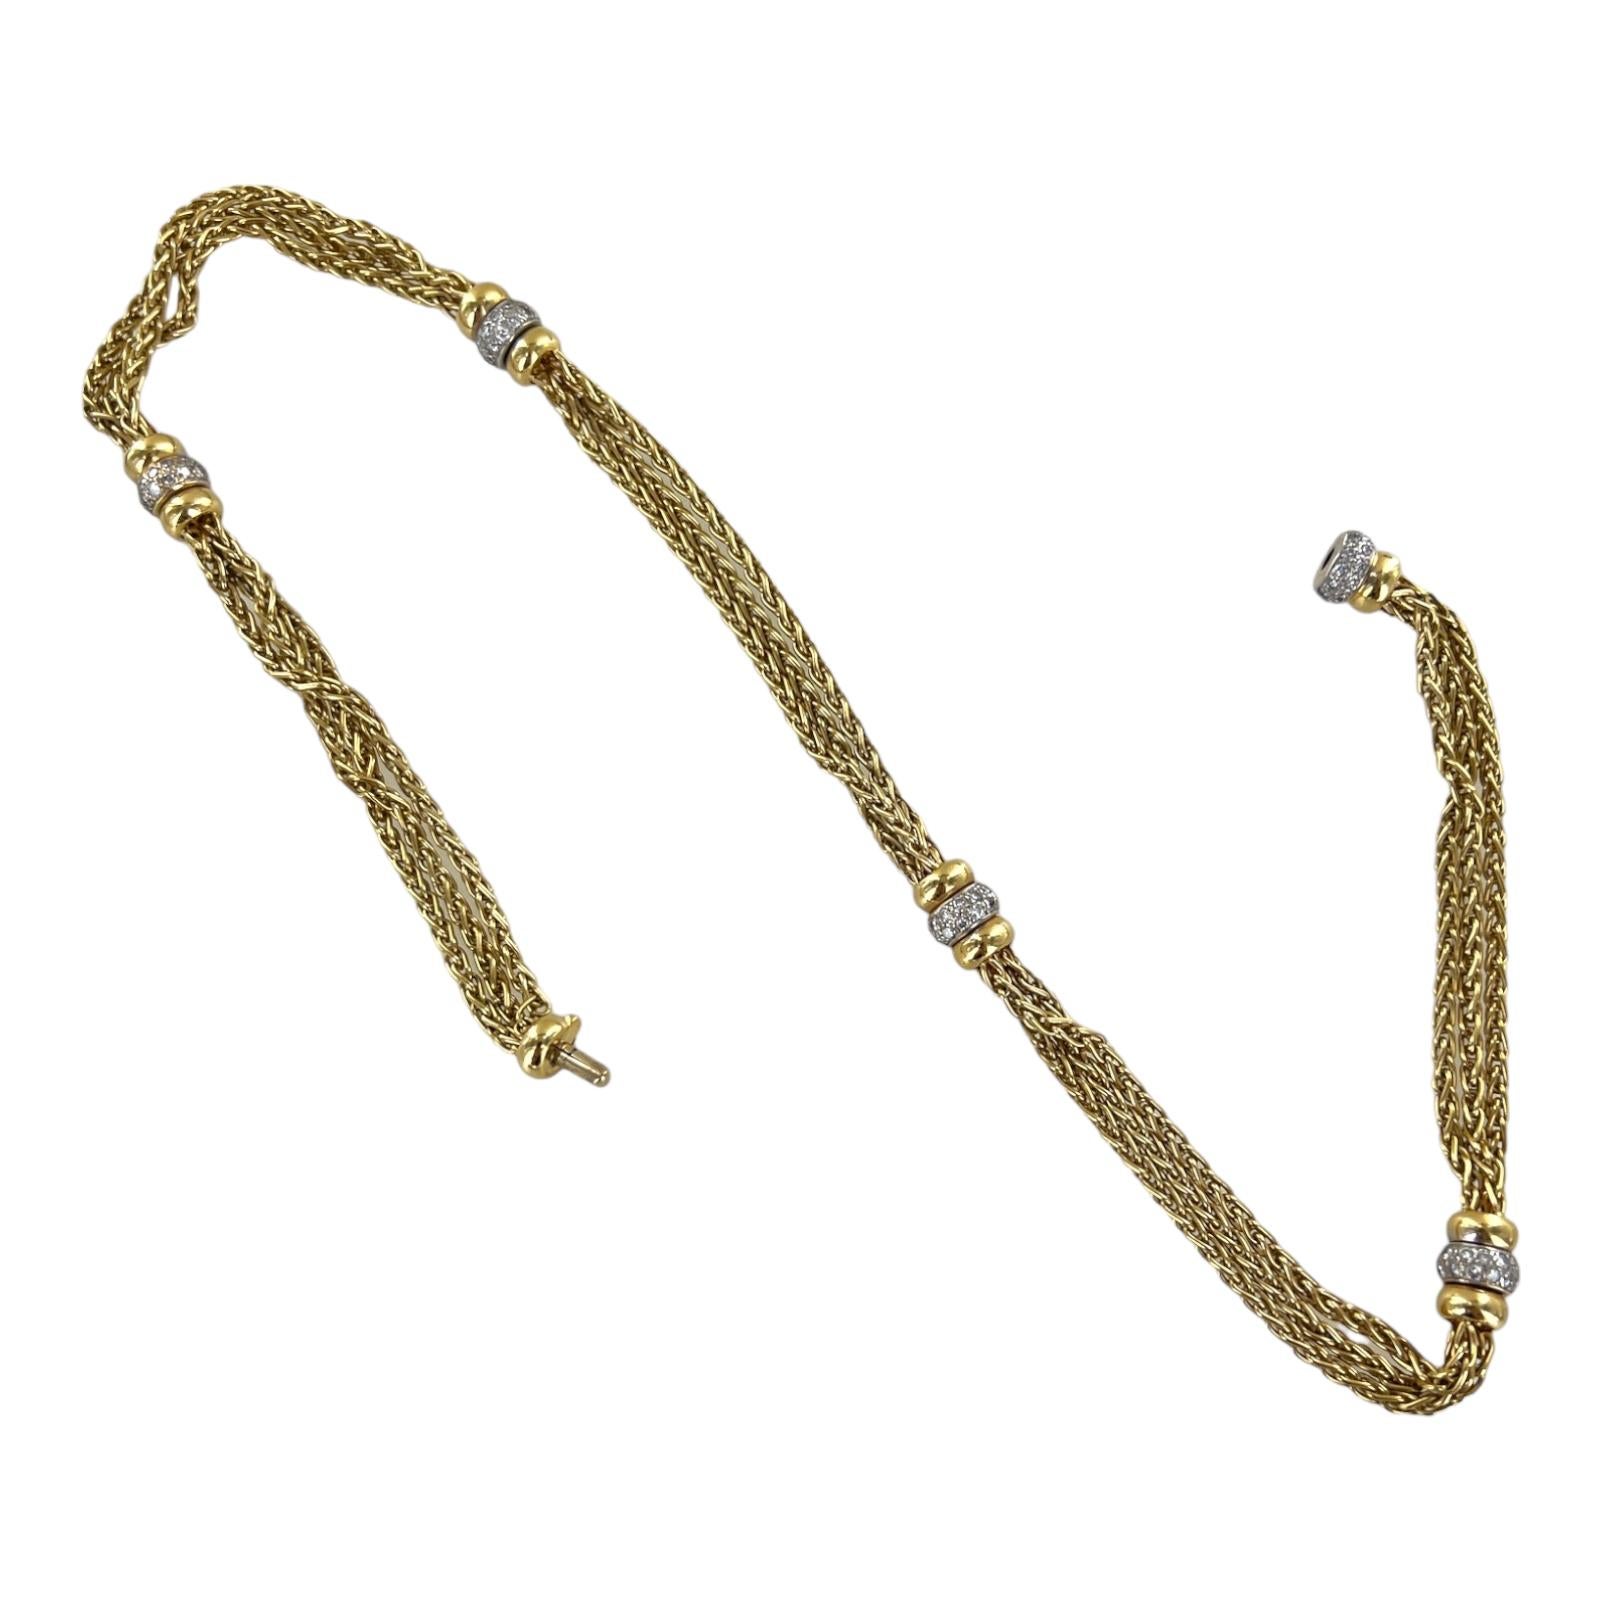 4.32ctw Diamond 18 Karat Yellow Gold Three Strand Hidden Clasp Link Necklace In Excellent Condition For Sale In Boca Raton, FL